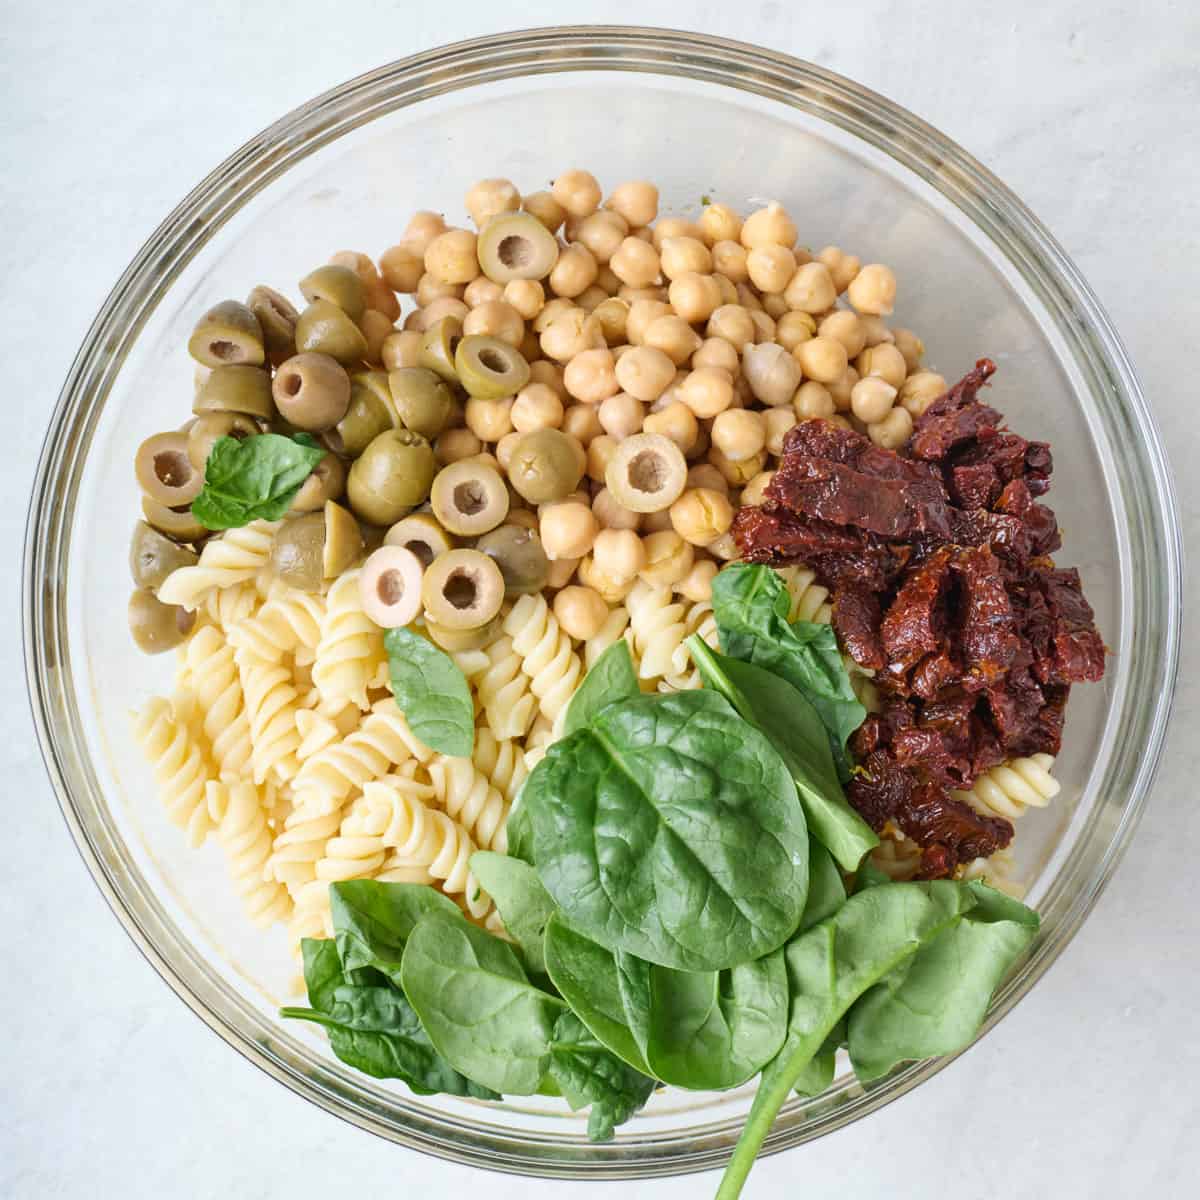 Cooked pasta, chickpeas, olives, spinach and sun dried tomatoes added on top of dressing.